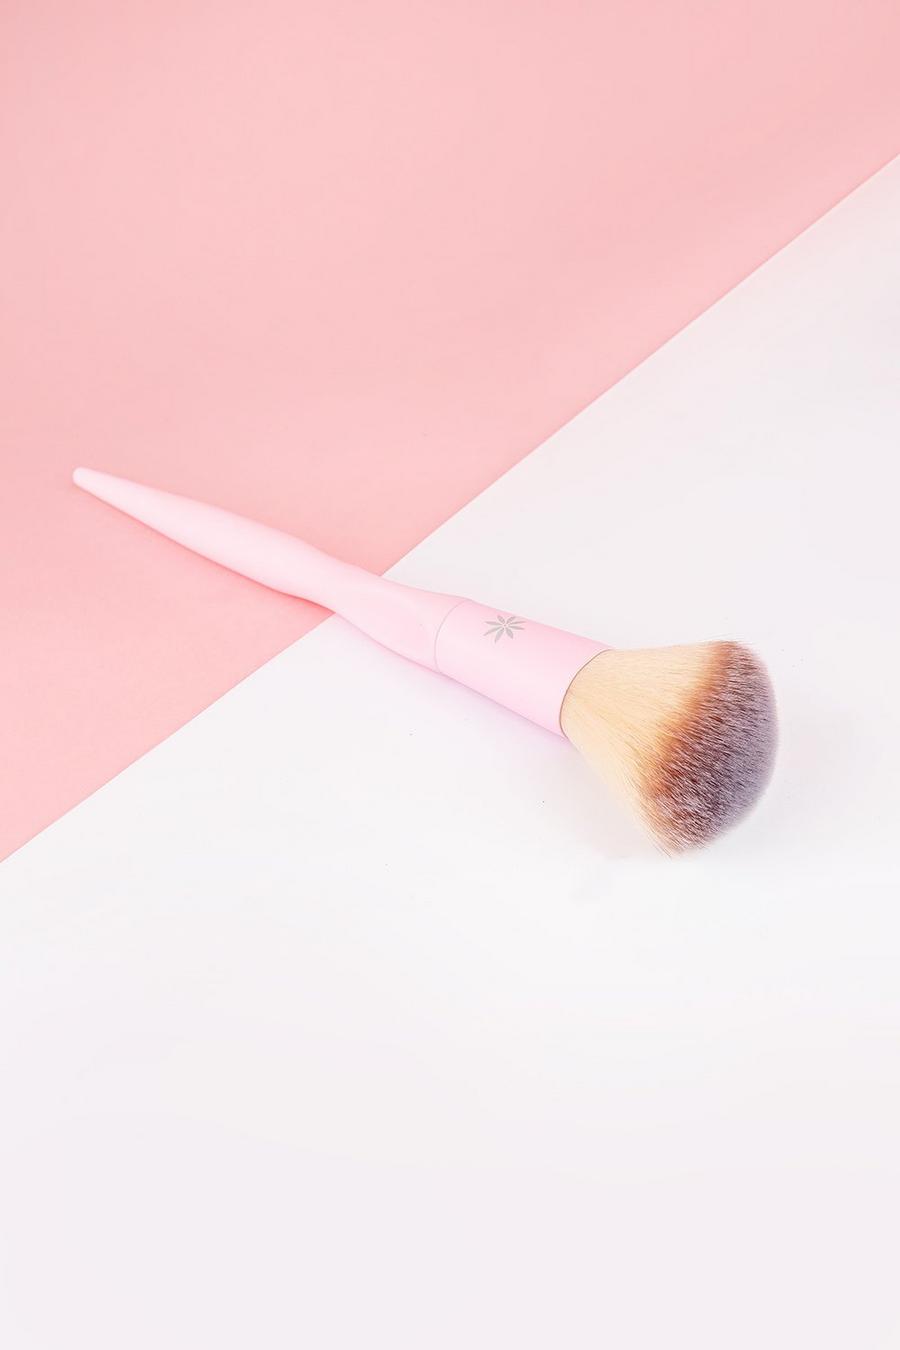 Brushworks Hd - Pennello per contouring, Baby pink rosa